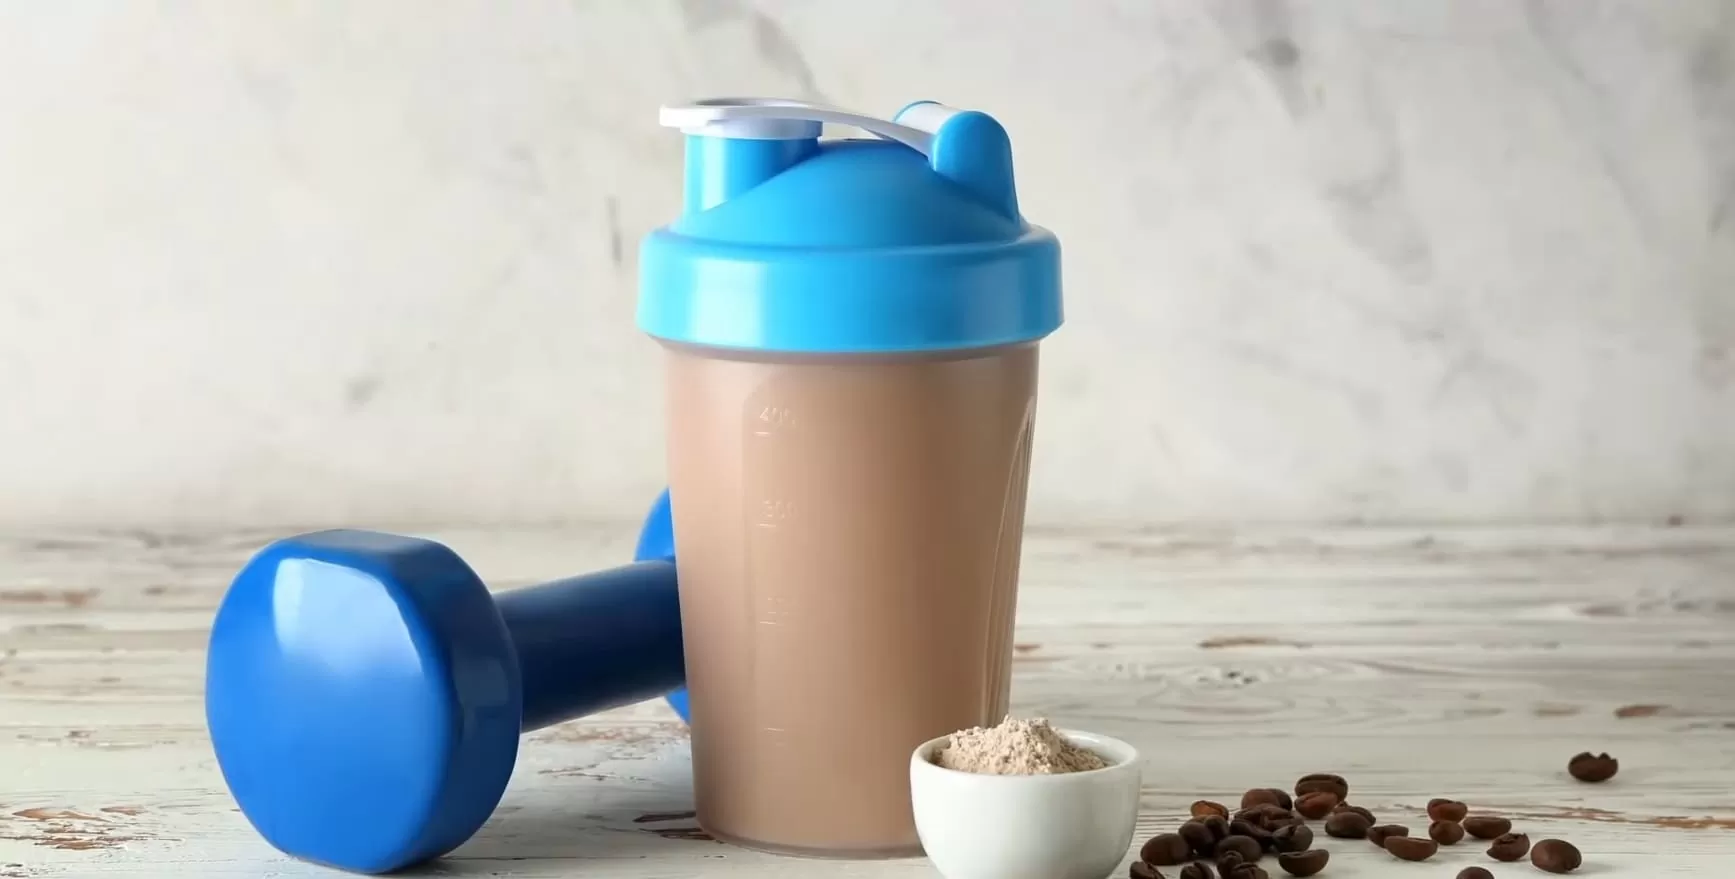 Can You Mix Protein Powder With Coffee?